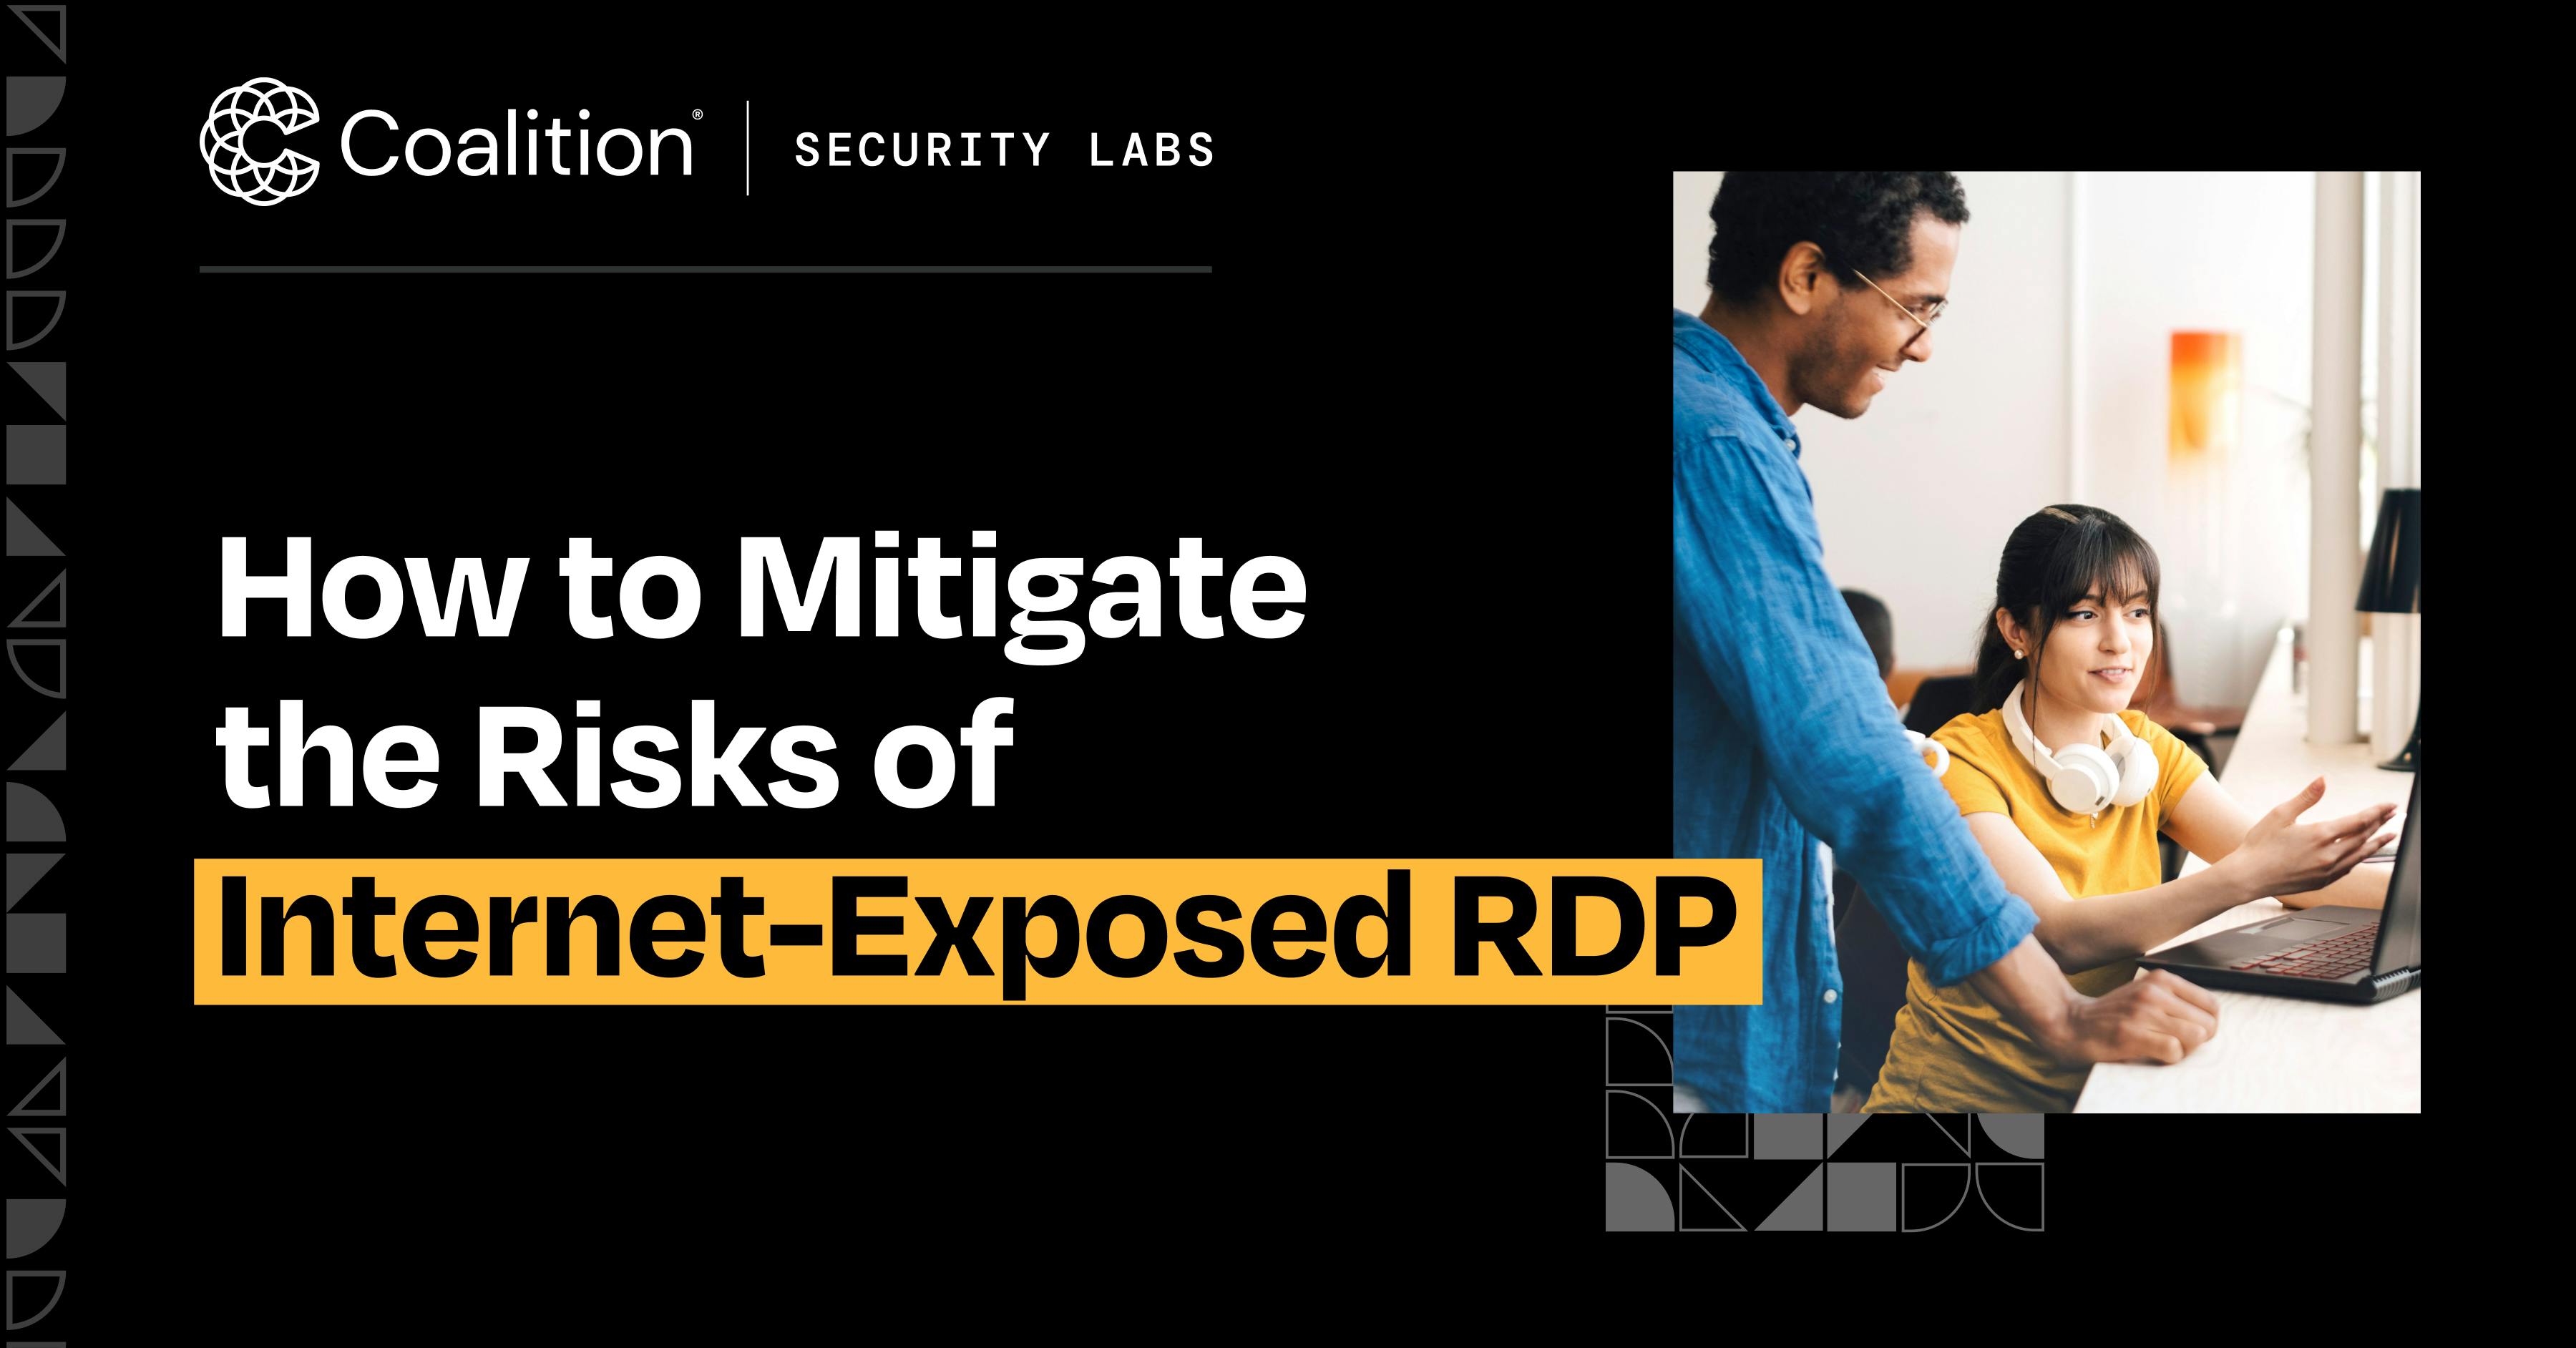 Blog: How to Mitigate the Risks of Internet-Exposed RDP